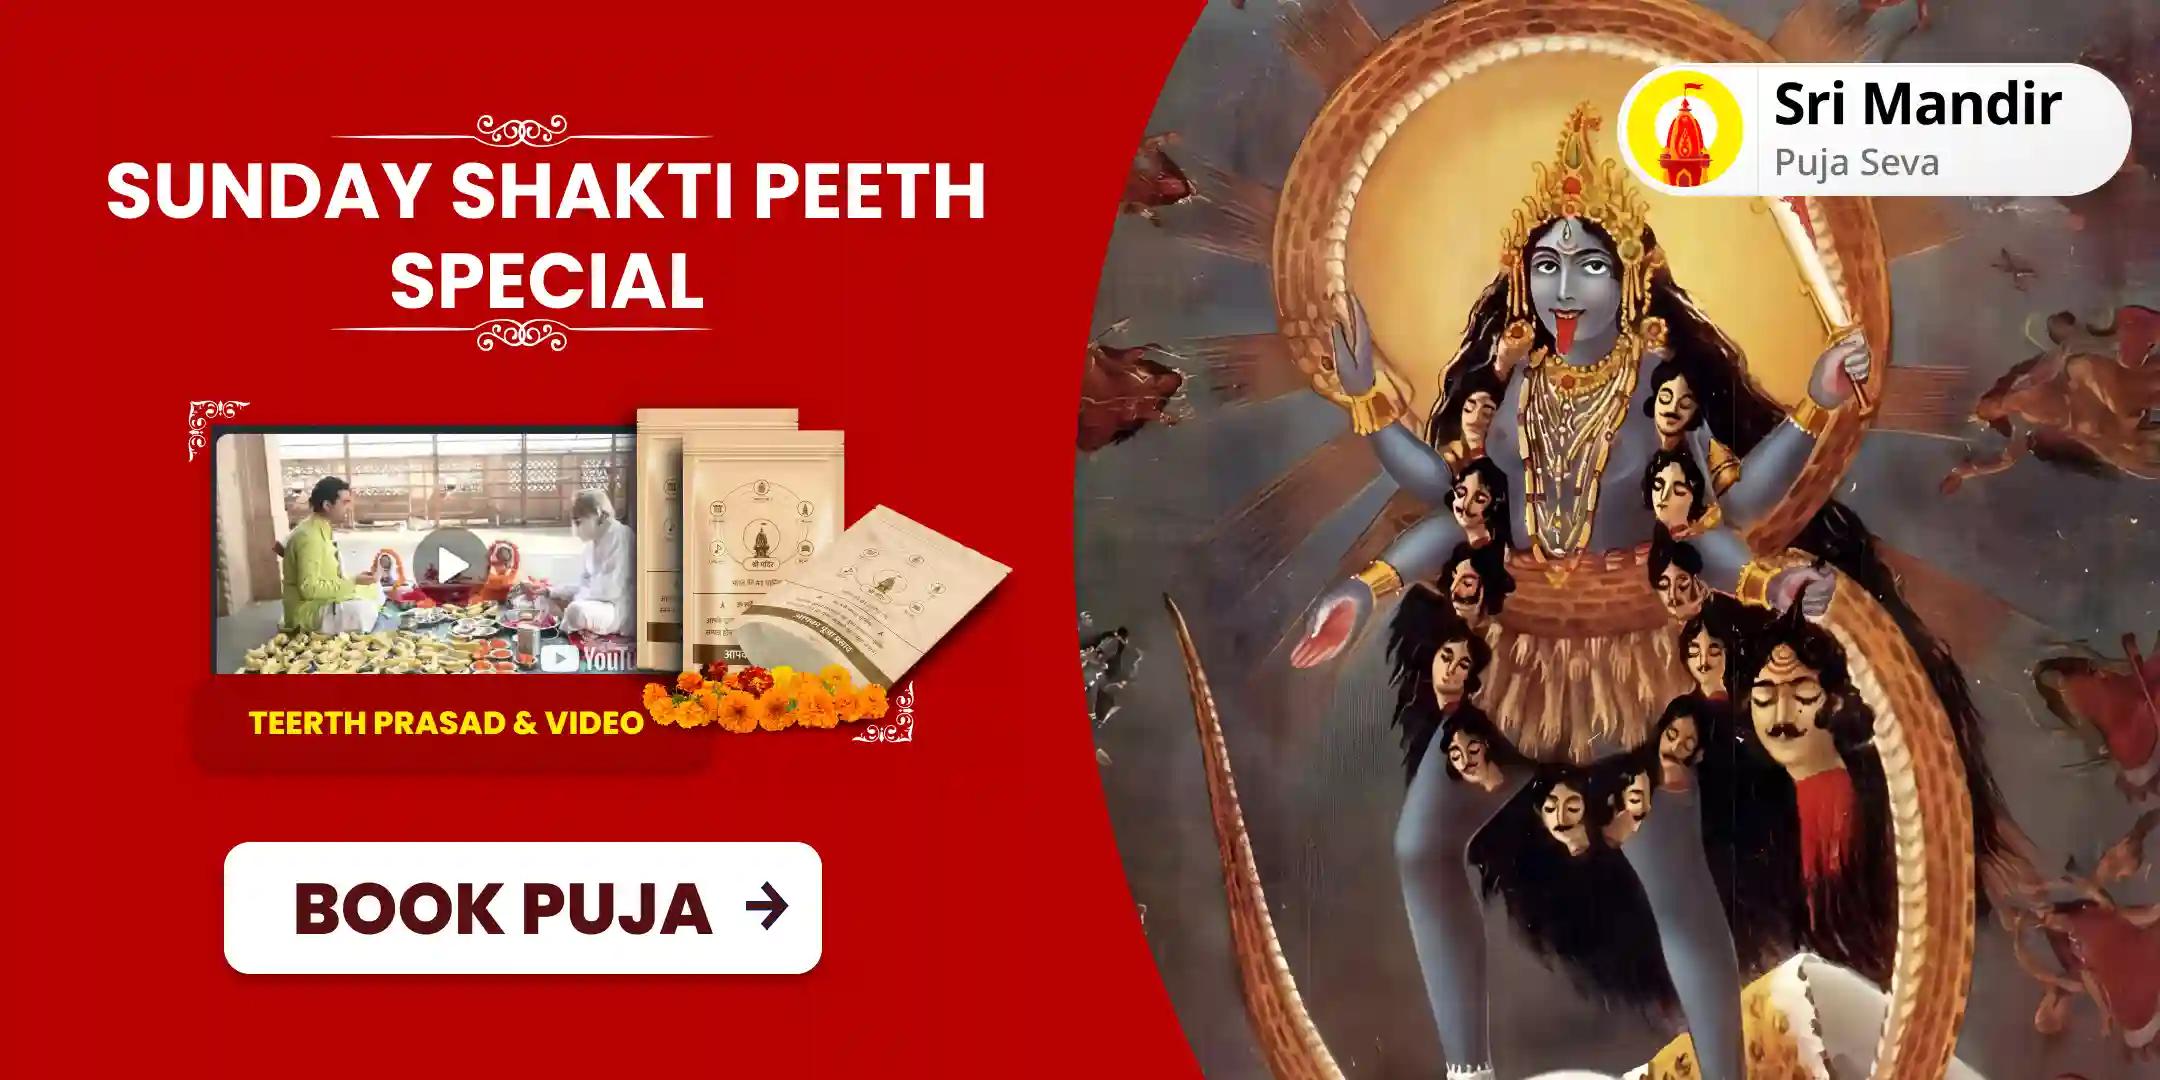 Sunday Shakti Peeth Special Maa Kali Tantra Yukta Yagya for Protection against Negative Energies, Evil Forces and Protection from Fear